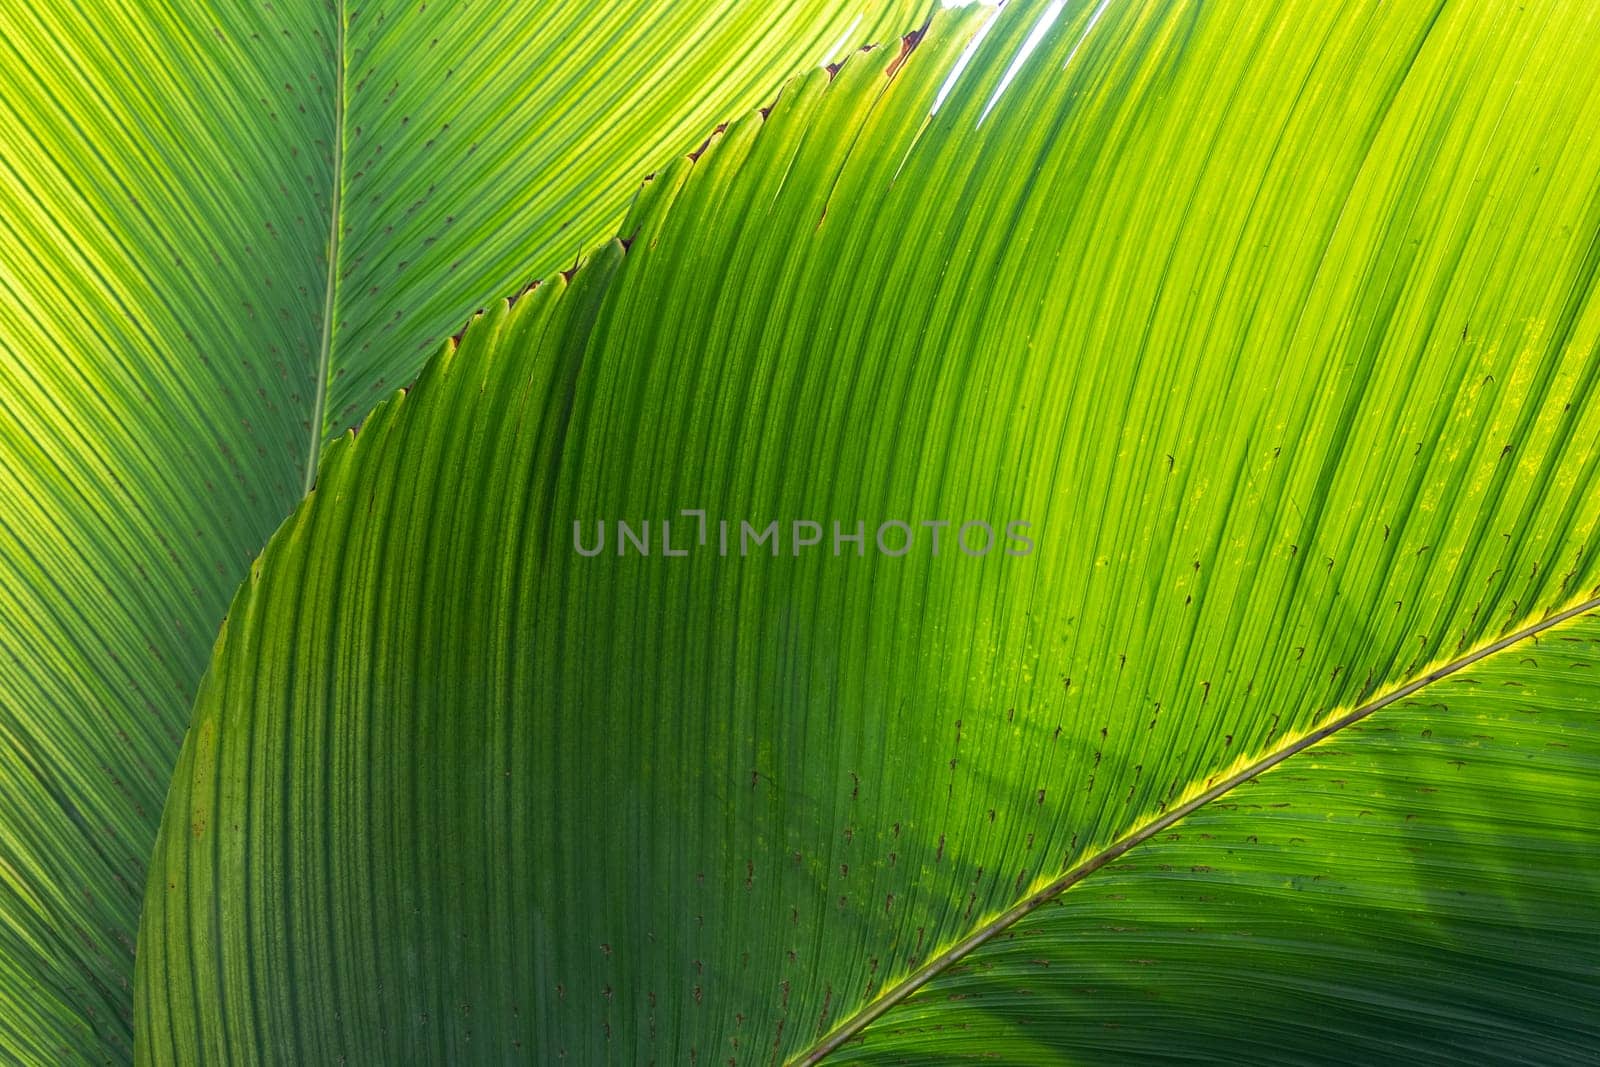 Beautiful banana leaves texture background, natural green decor, floristics botany and foliage, copy space for advertisement or promotional text.